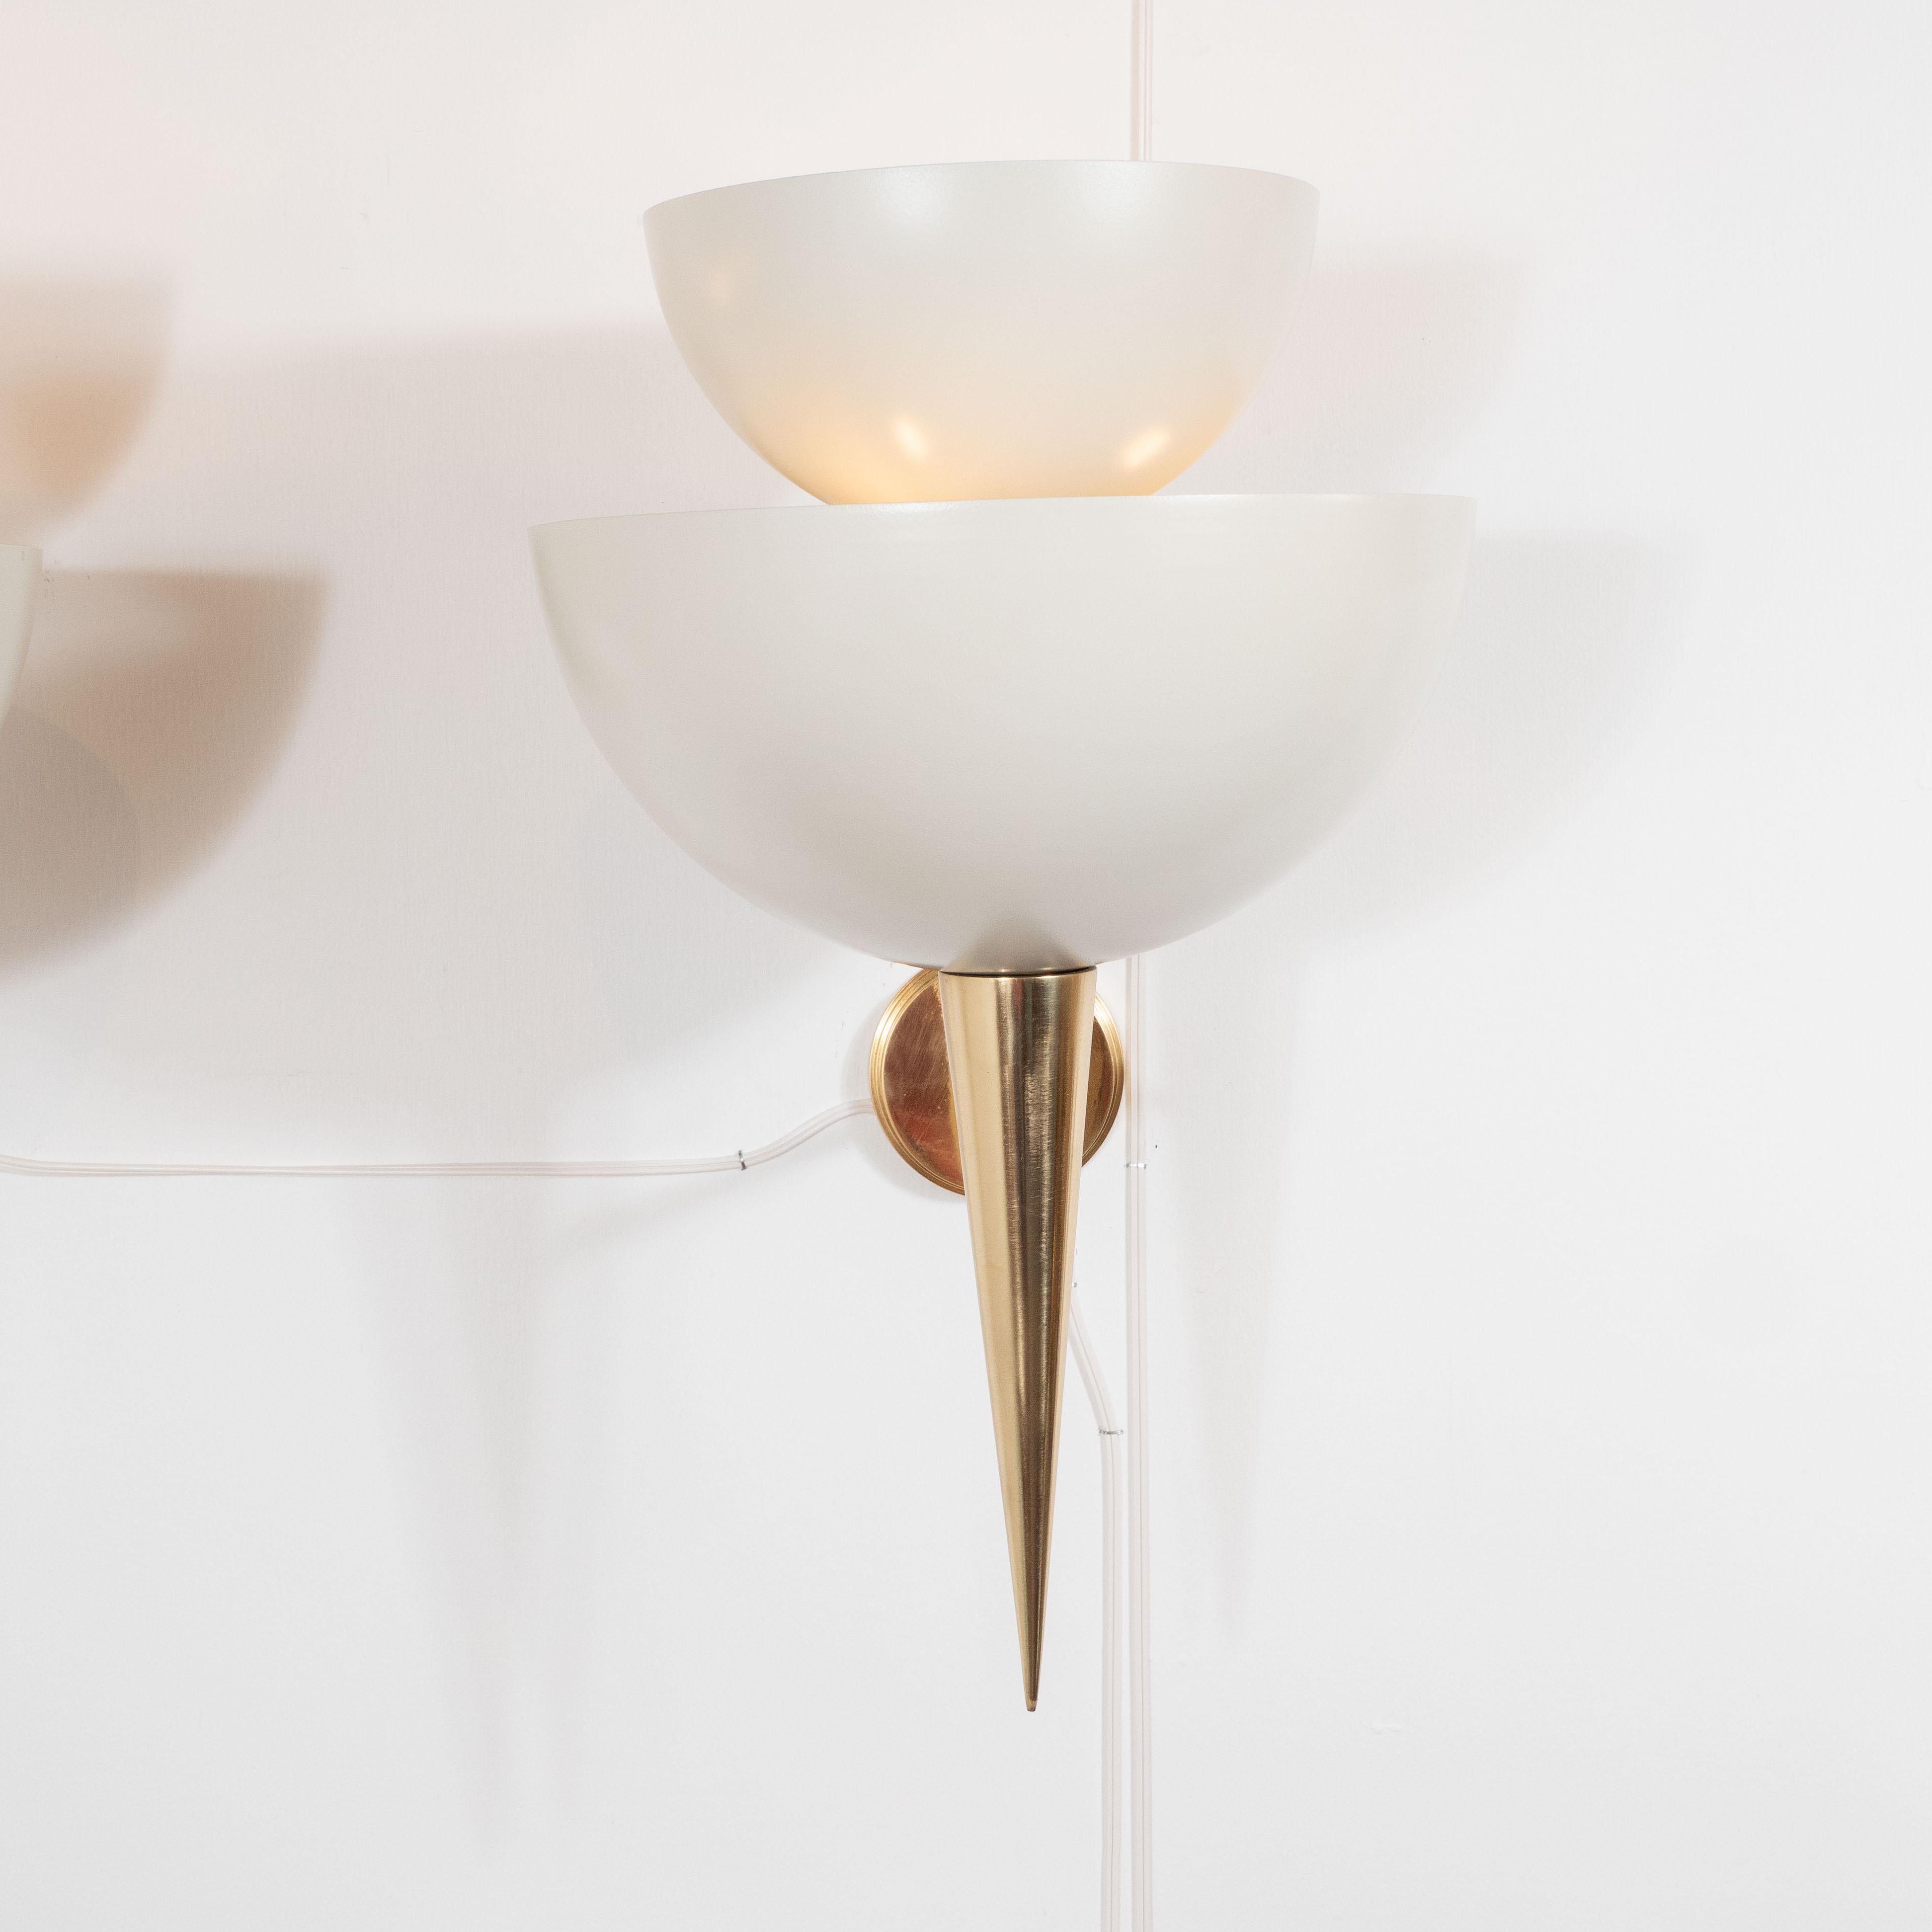 Italian Pair of Soft White Powder-Coated Metal Cup and Brass Spear Sconces, Italy